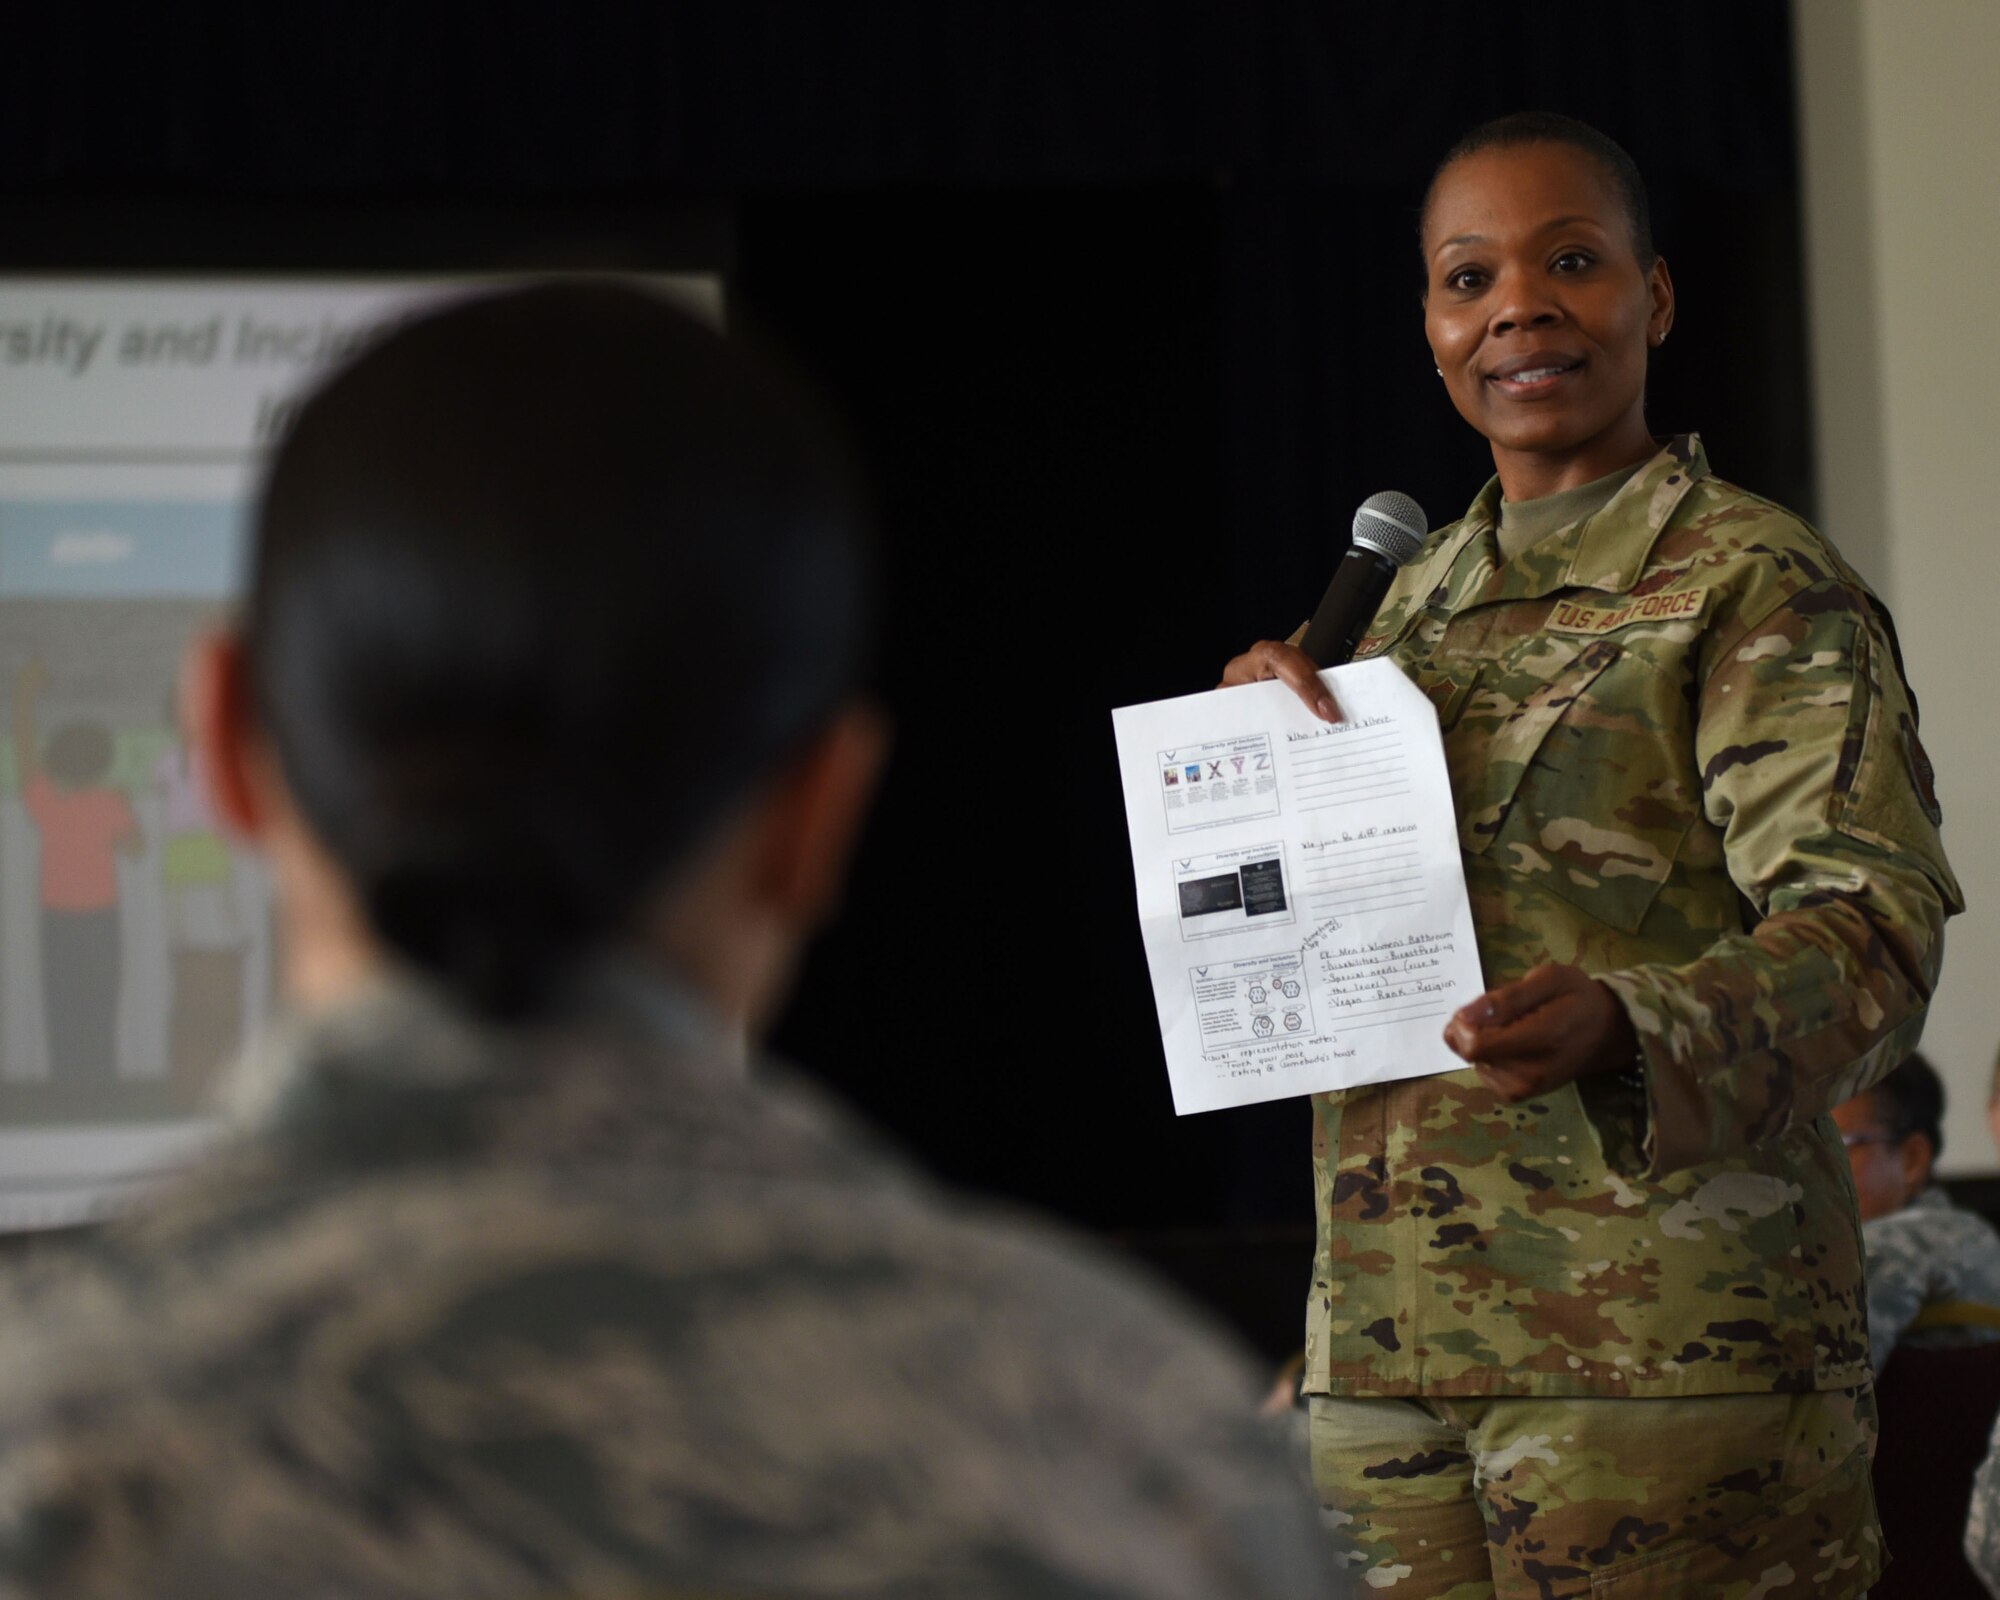 U.S. Air Force Chief Master Sgt. Janna Wesley, Chief of Military Force Management, speaks to a 70th Intelligence, Surveillance and Reconnaissance Wing Airman during a diversity and inclusion briefing at Fort George G. Meade, Maryland, Aug. 6, 2019. Wesley delivered a speech and discussed overcoming barriers, as well as helping Airmen identify unconscious biases. (U.S. Air Force photo by Airman 1st Class Madison Frazier)